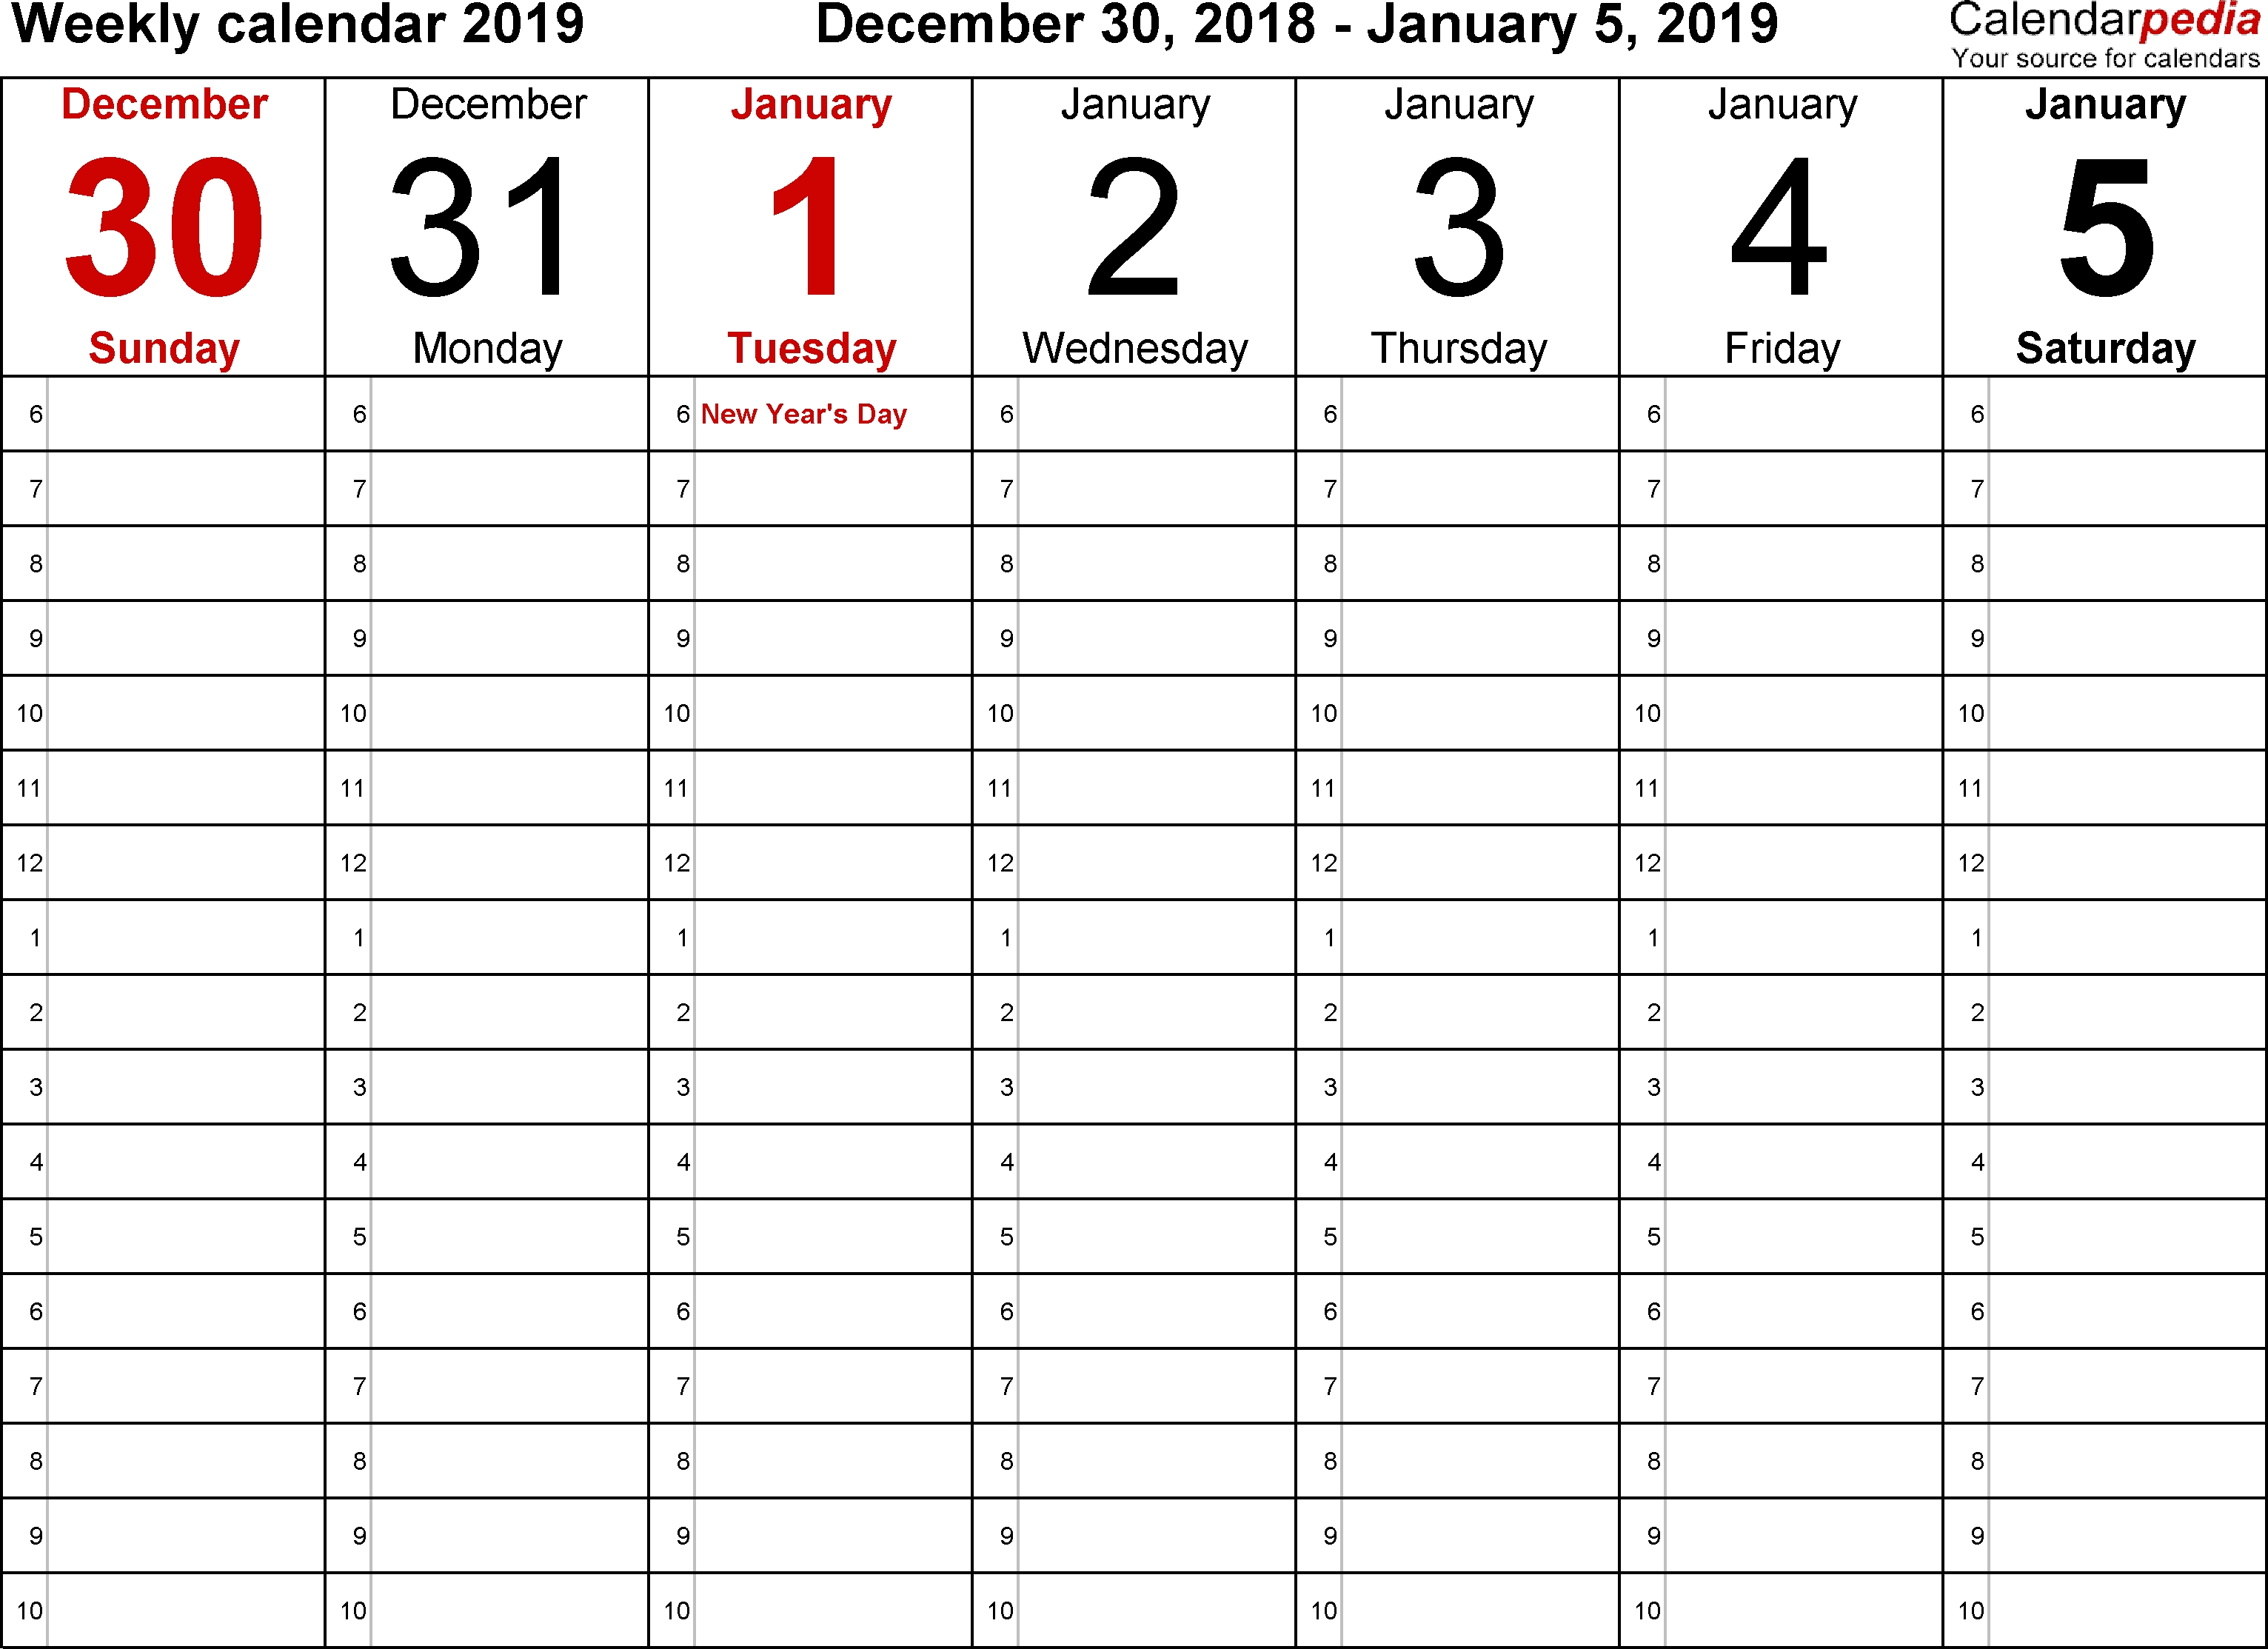 Weekly Calendar 2019 For Word - 12 Free Printable Templates within Free Printable Weekly Calendar Page With Notes Sections